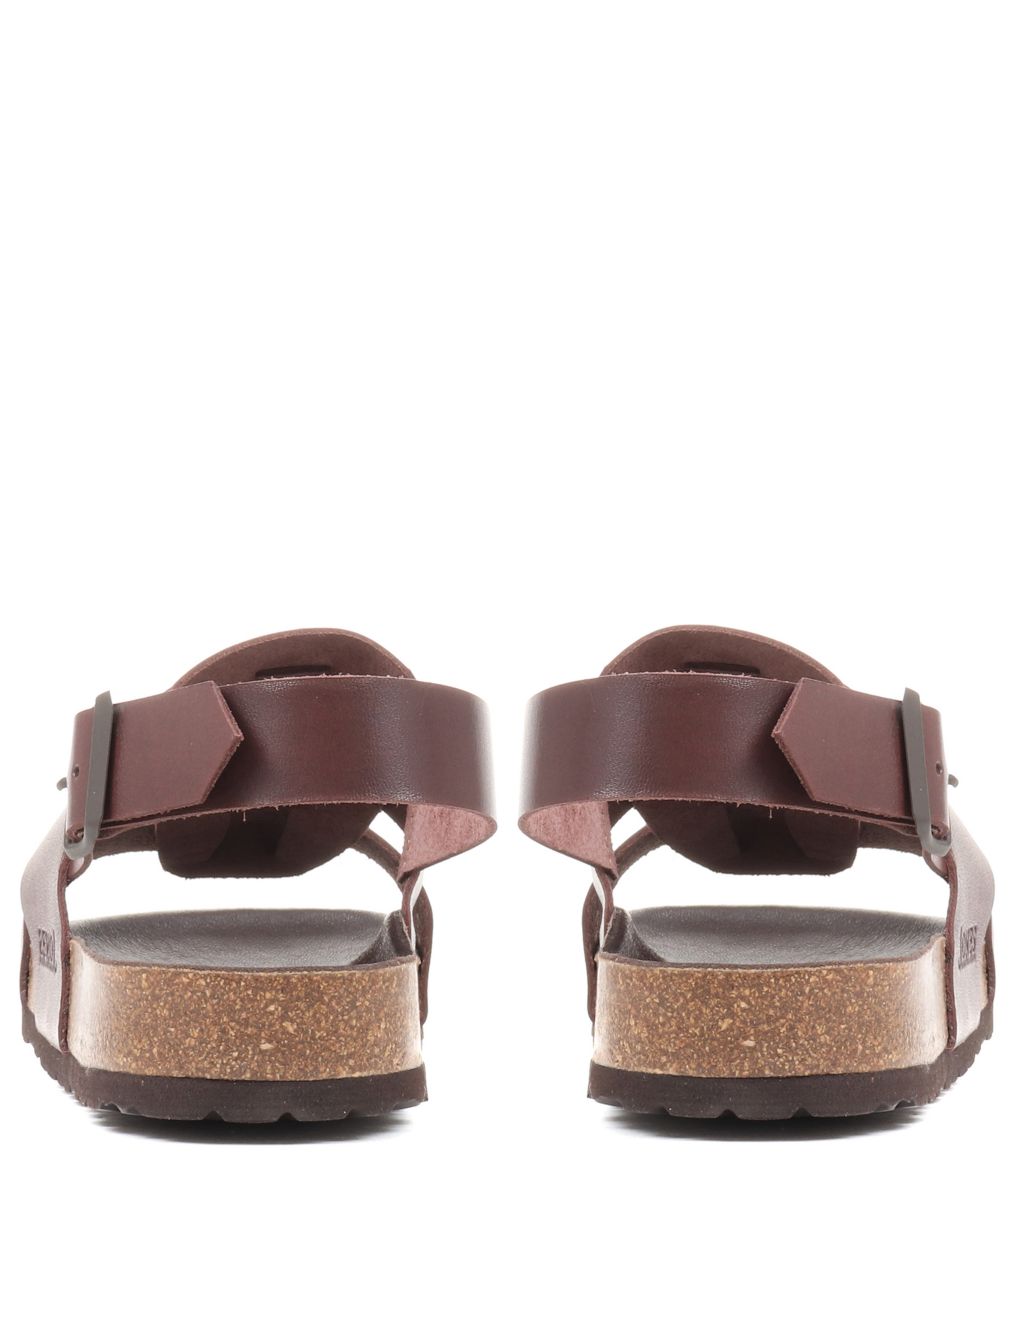 Leather Sandals image 4